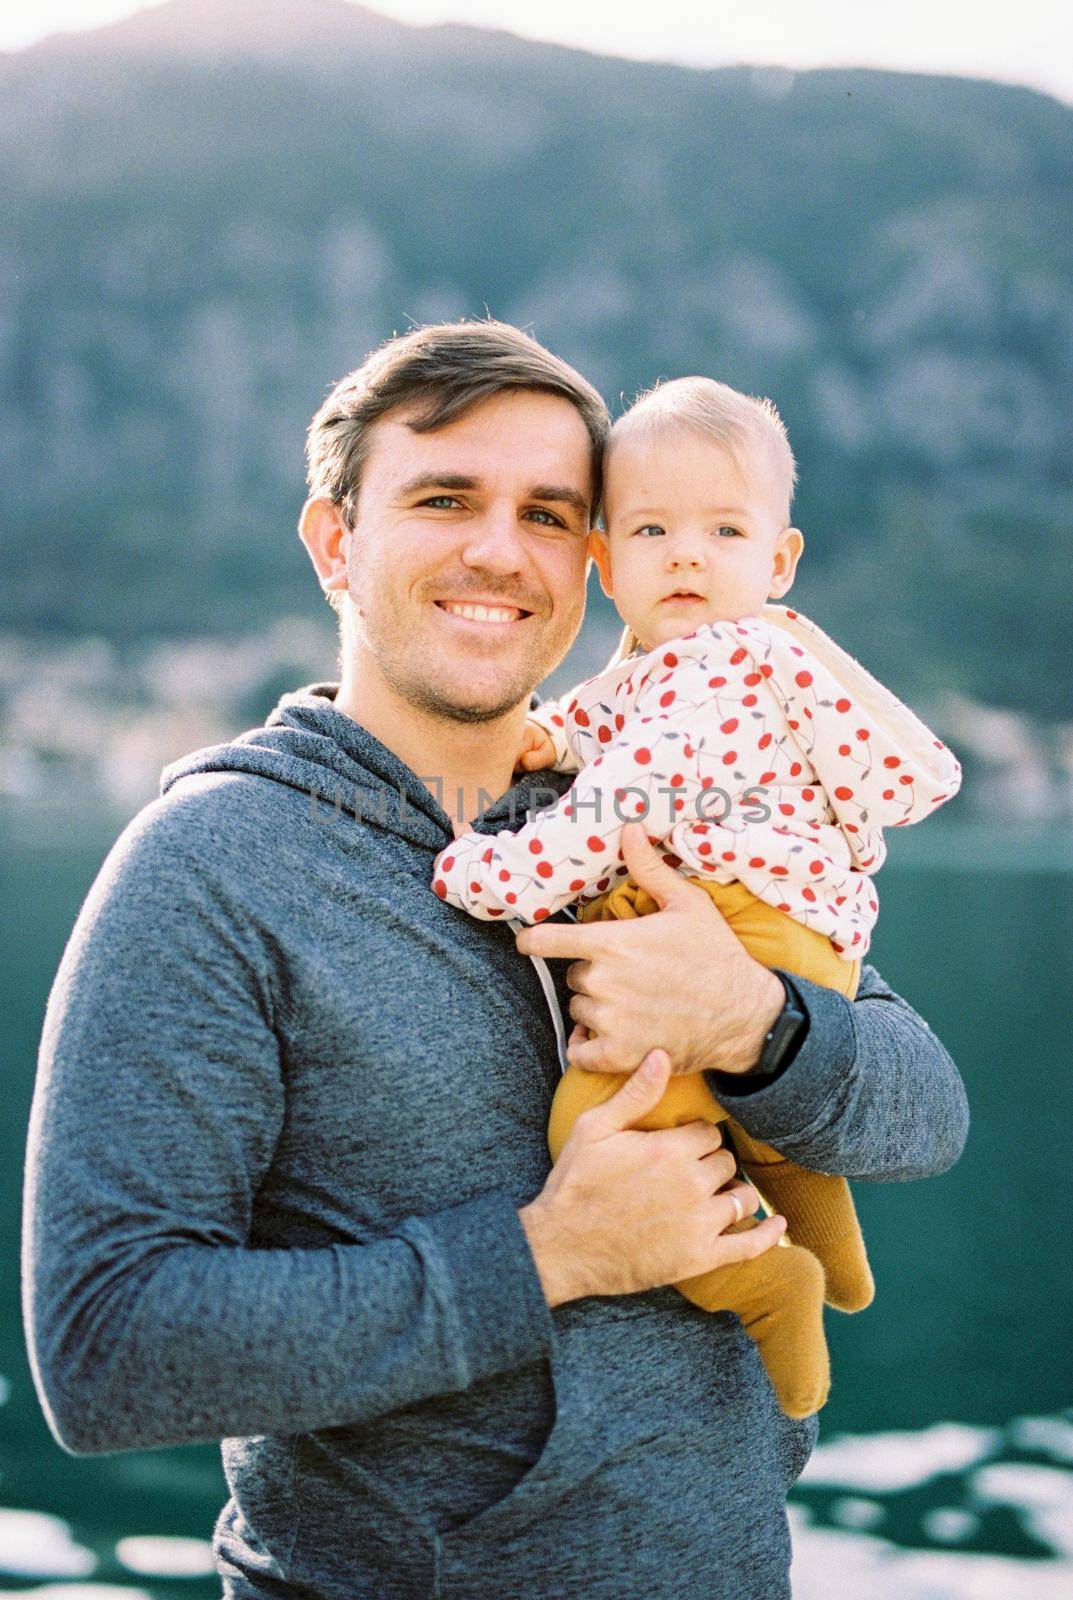 Smiling dad with a baby in his arms on the background of mountains. Portrait. High quality photo